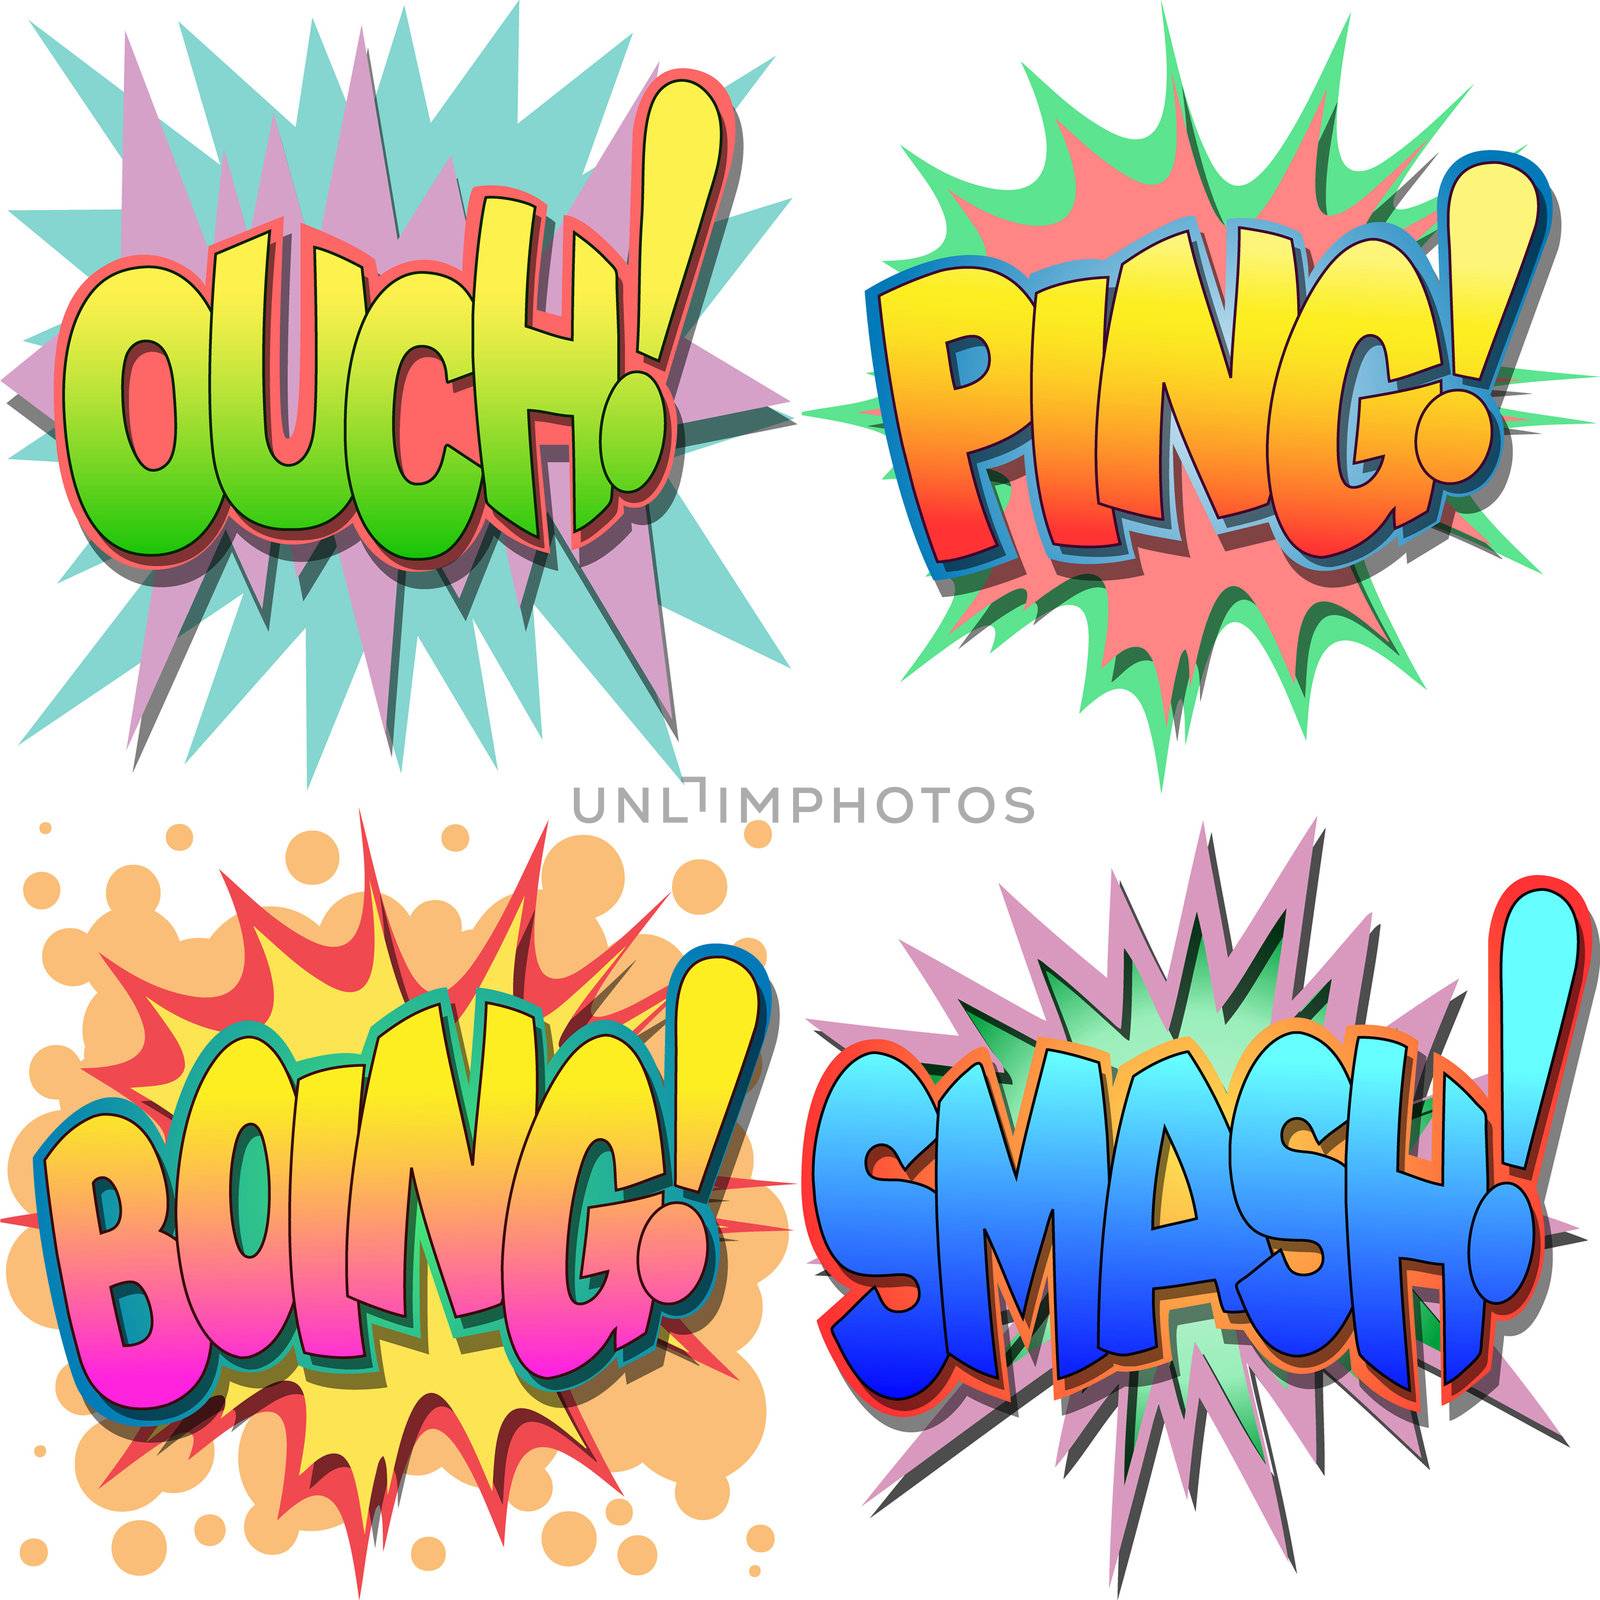 
A Selection of Comic Book Exclamations and Action Words, Ouch, Ping, Boing, Smash